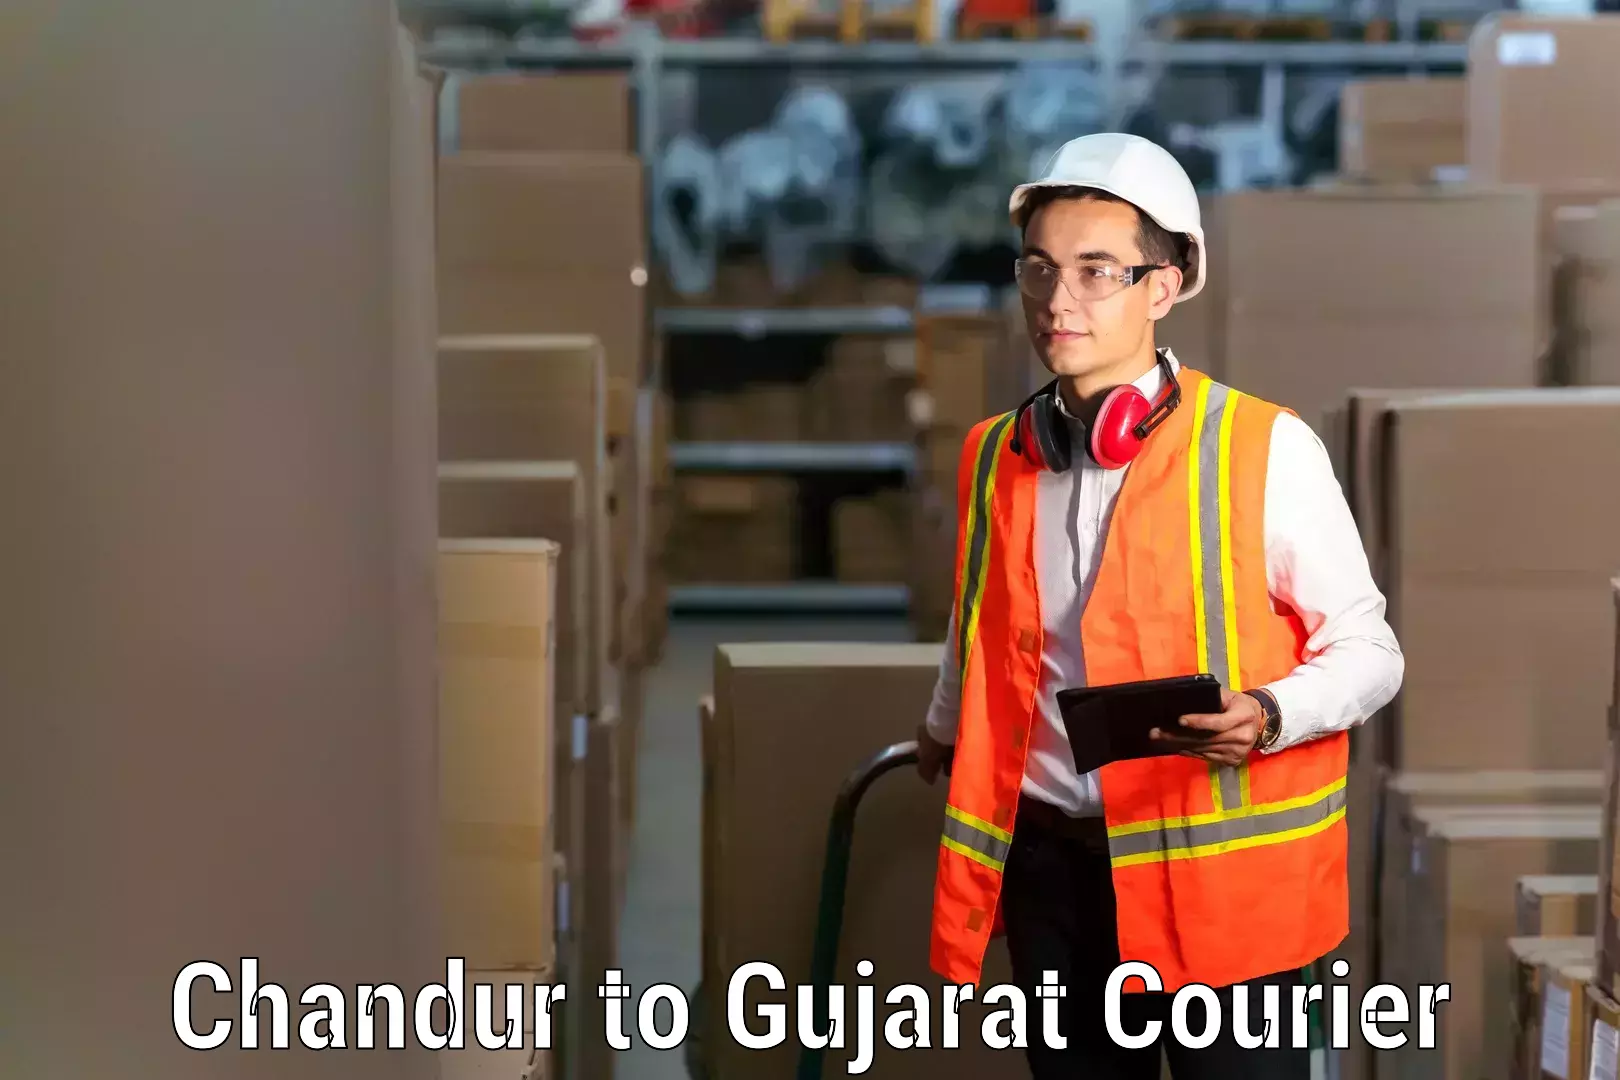 Professional packing services Chandur to Gujarat